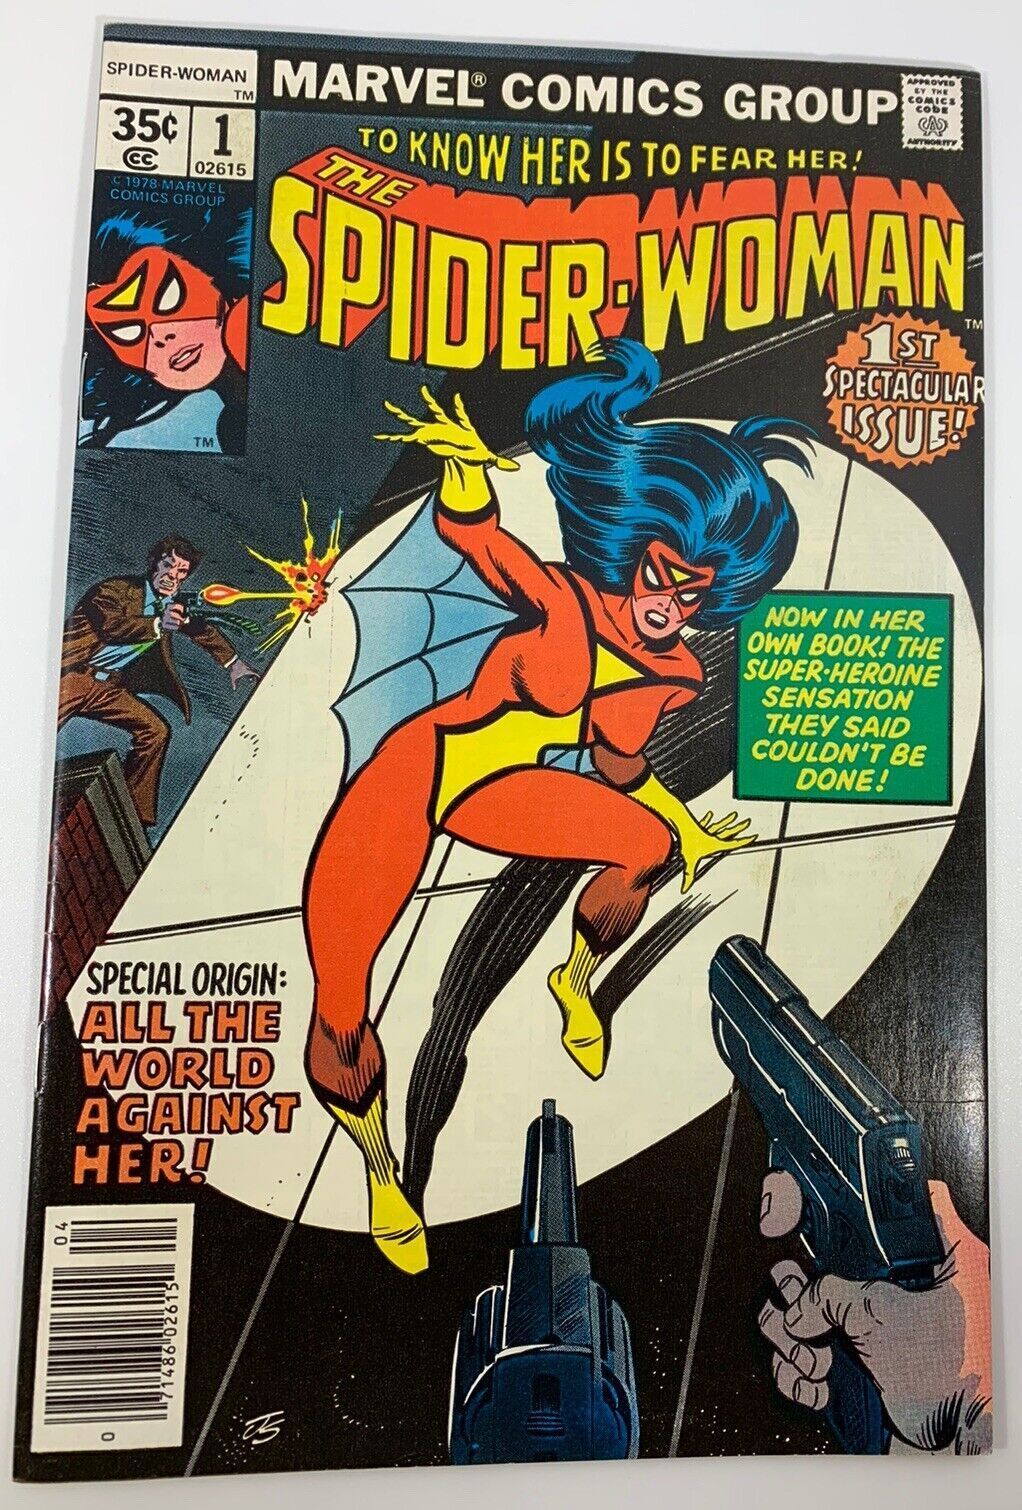 Spider-Woman #1 (1978) in 8.5 Very Fine+